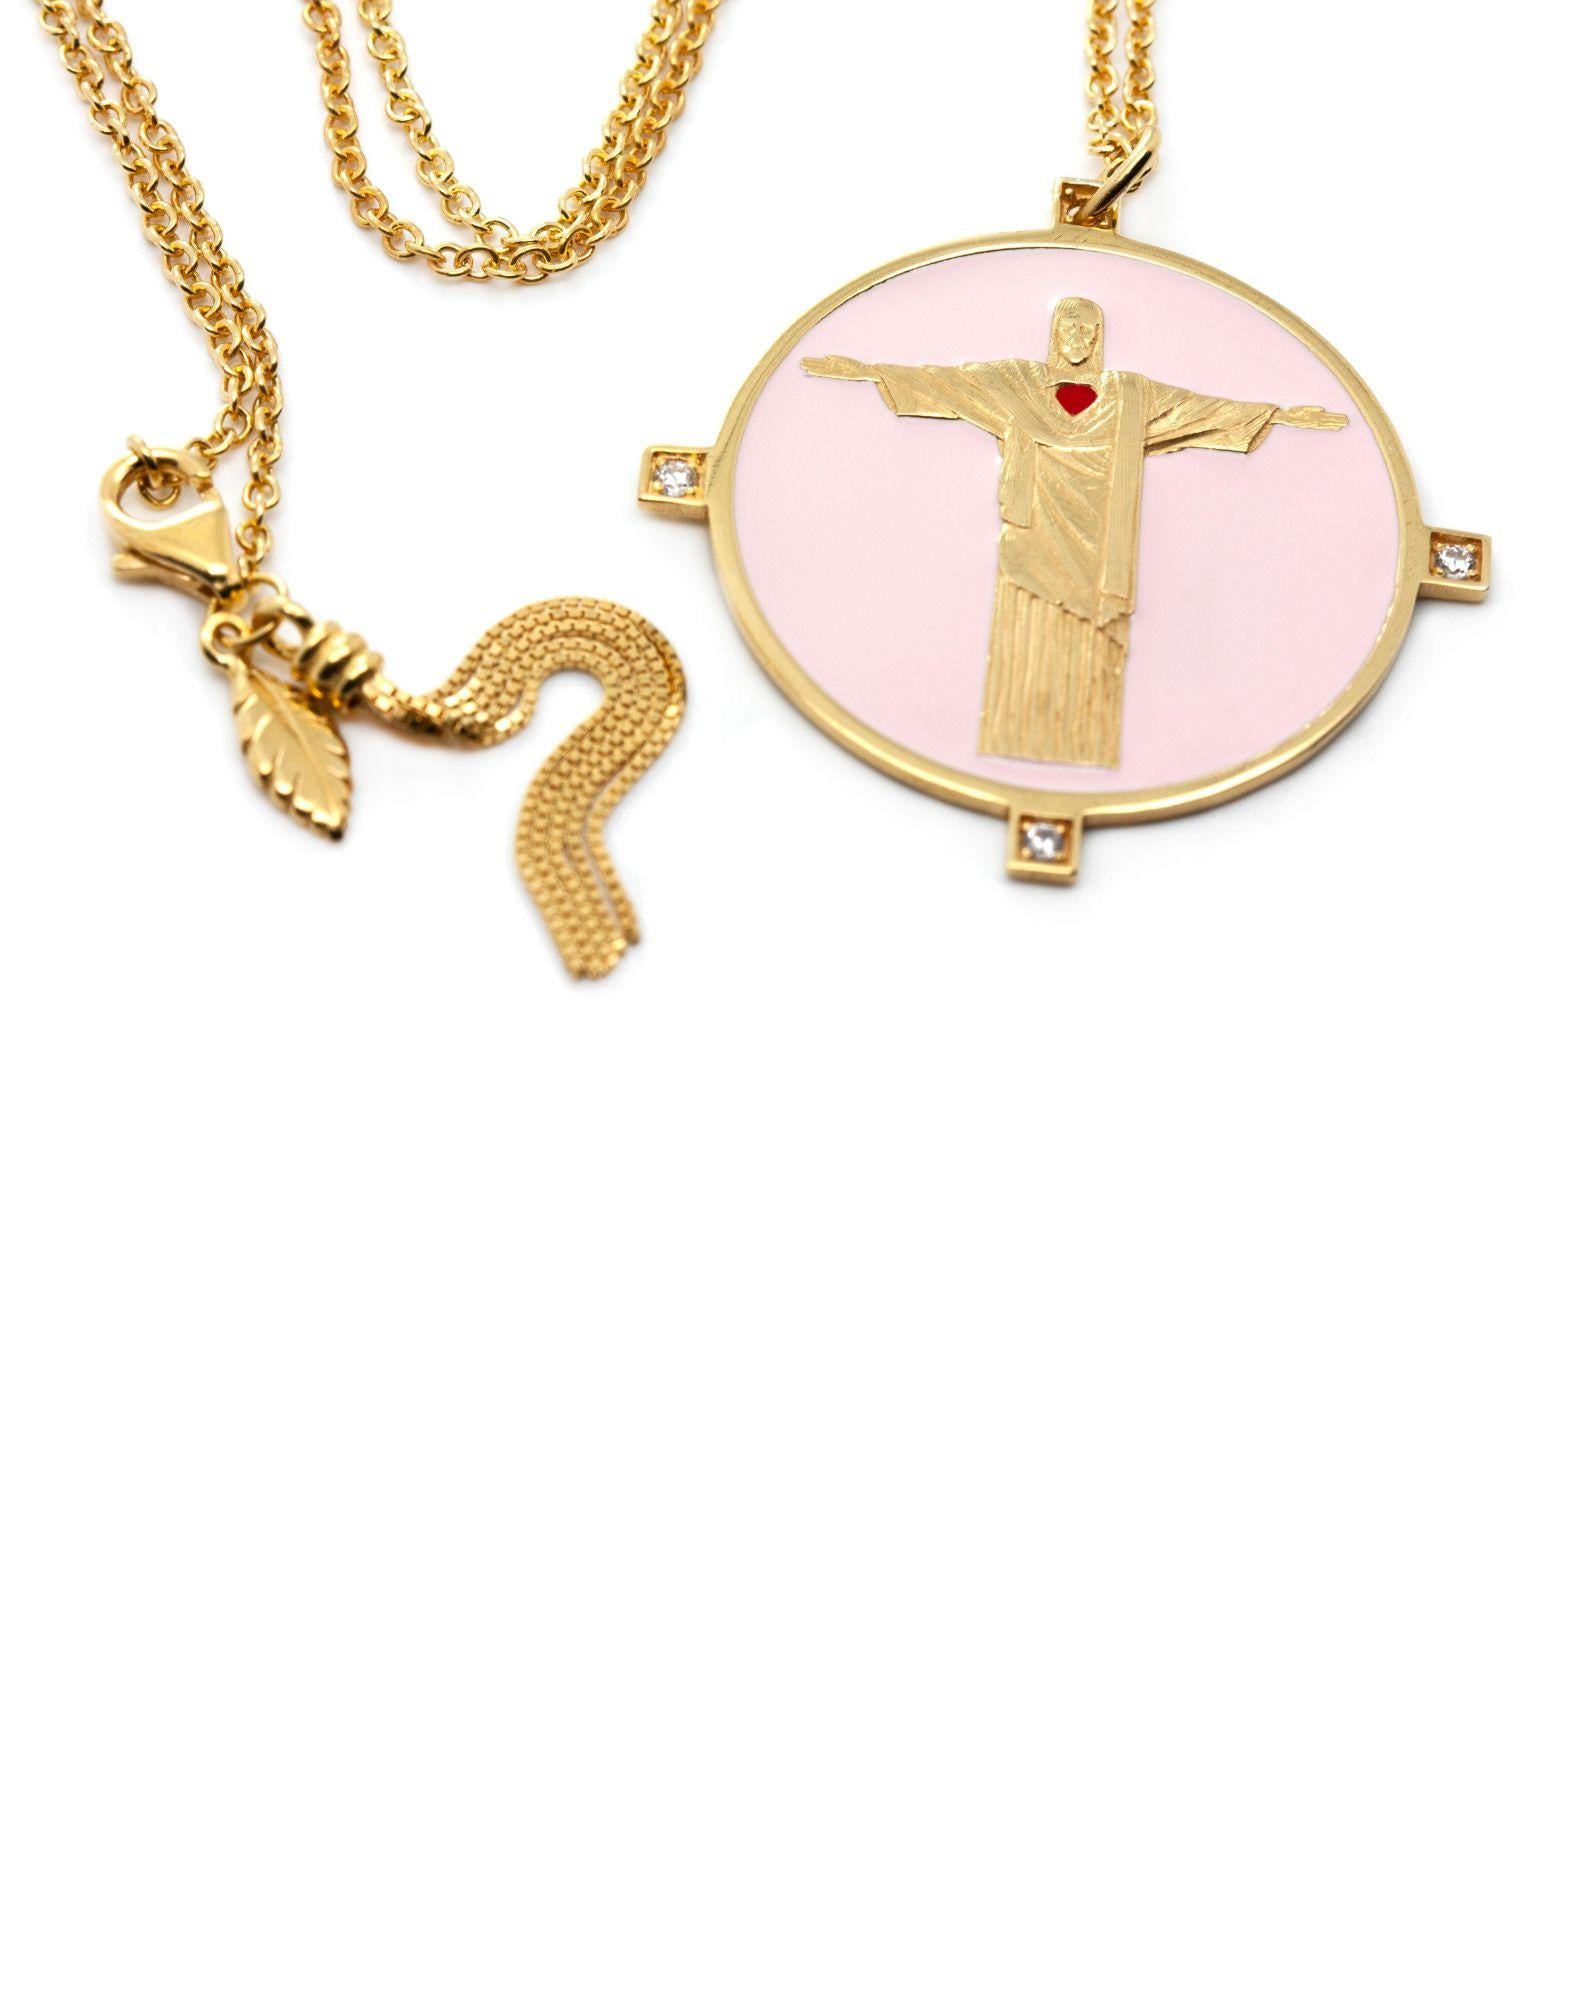 Corcovado necklace in 925 gold-plated sterling silver, hand-enameled with pink enamel.

The collection, featuring a unique, innovative and genderless design, consists of enameled pendants and rings made of 925 18-karat gold-plated sterling silver,